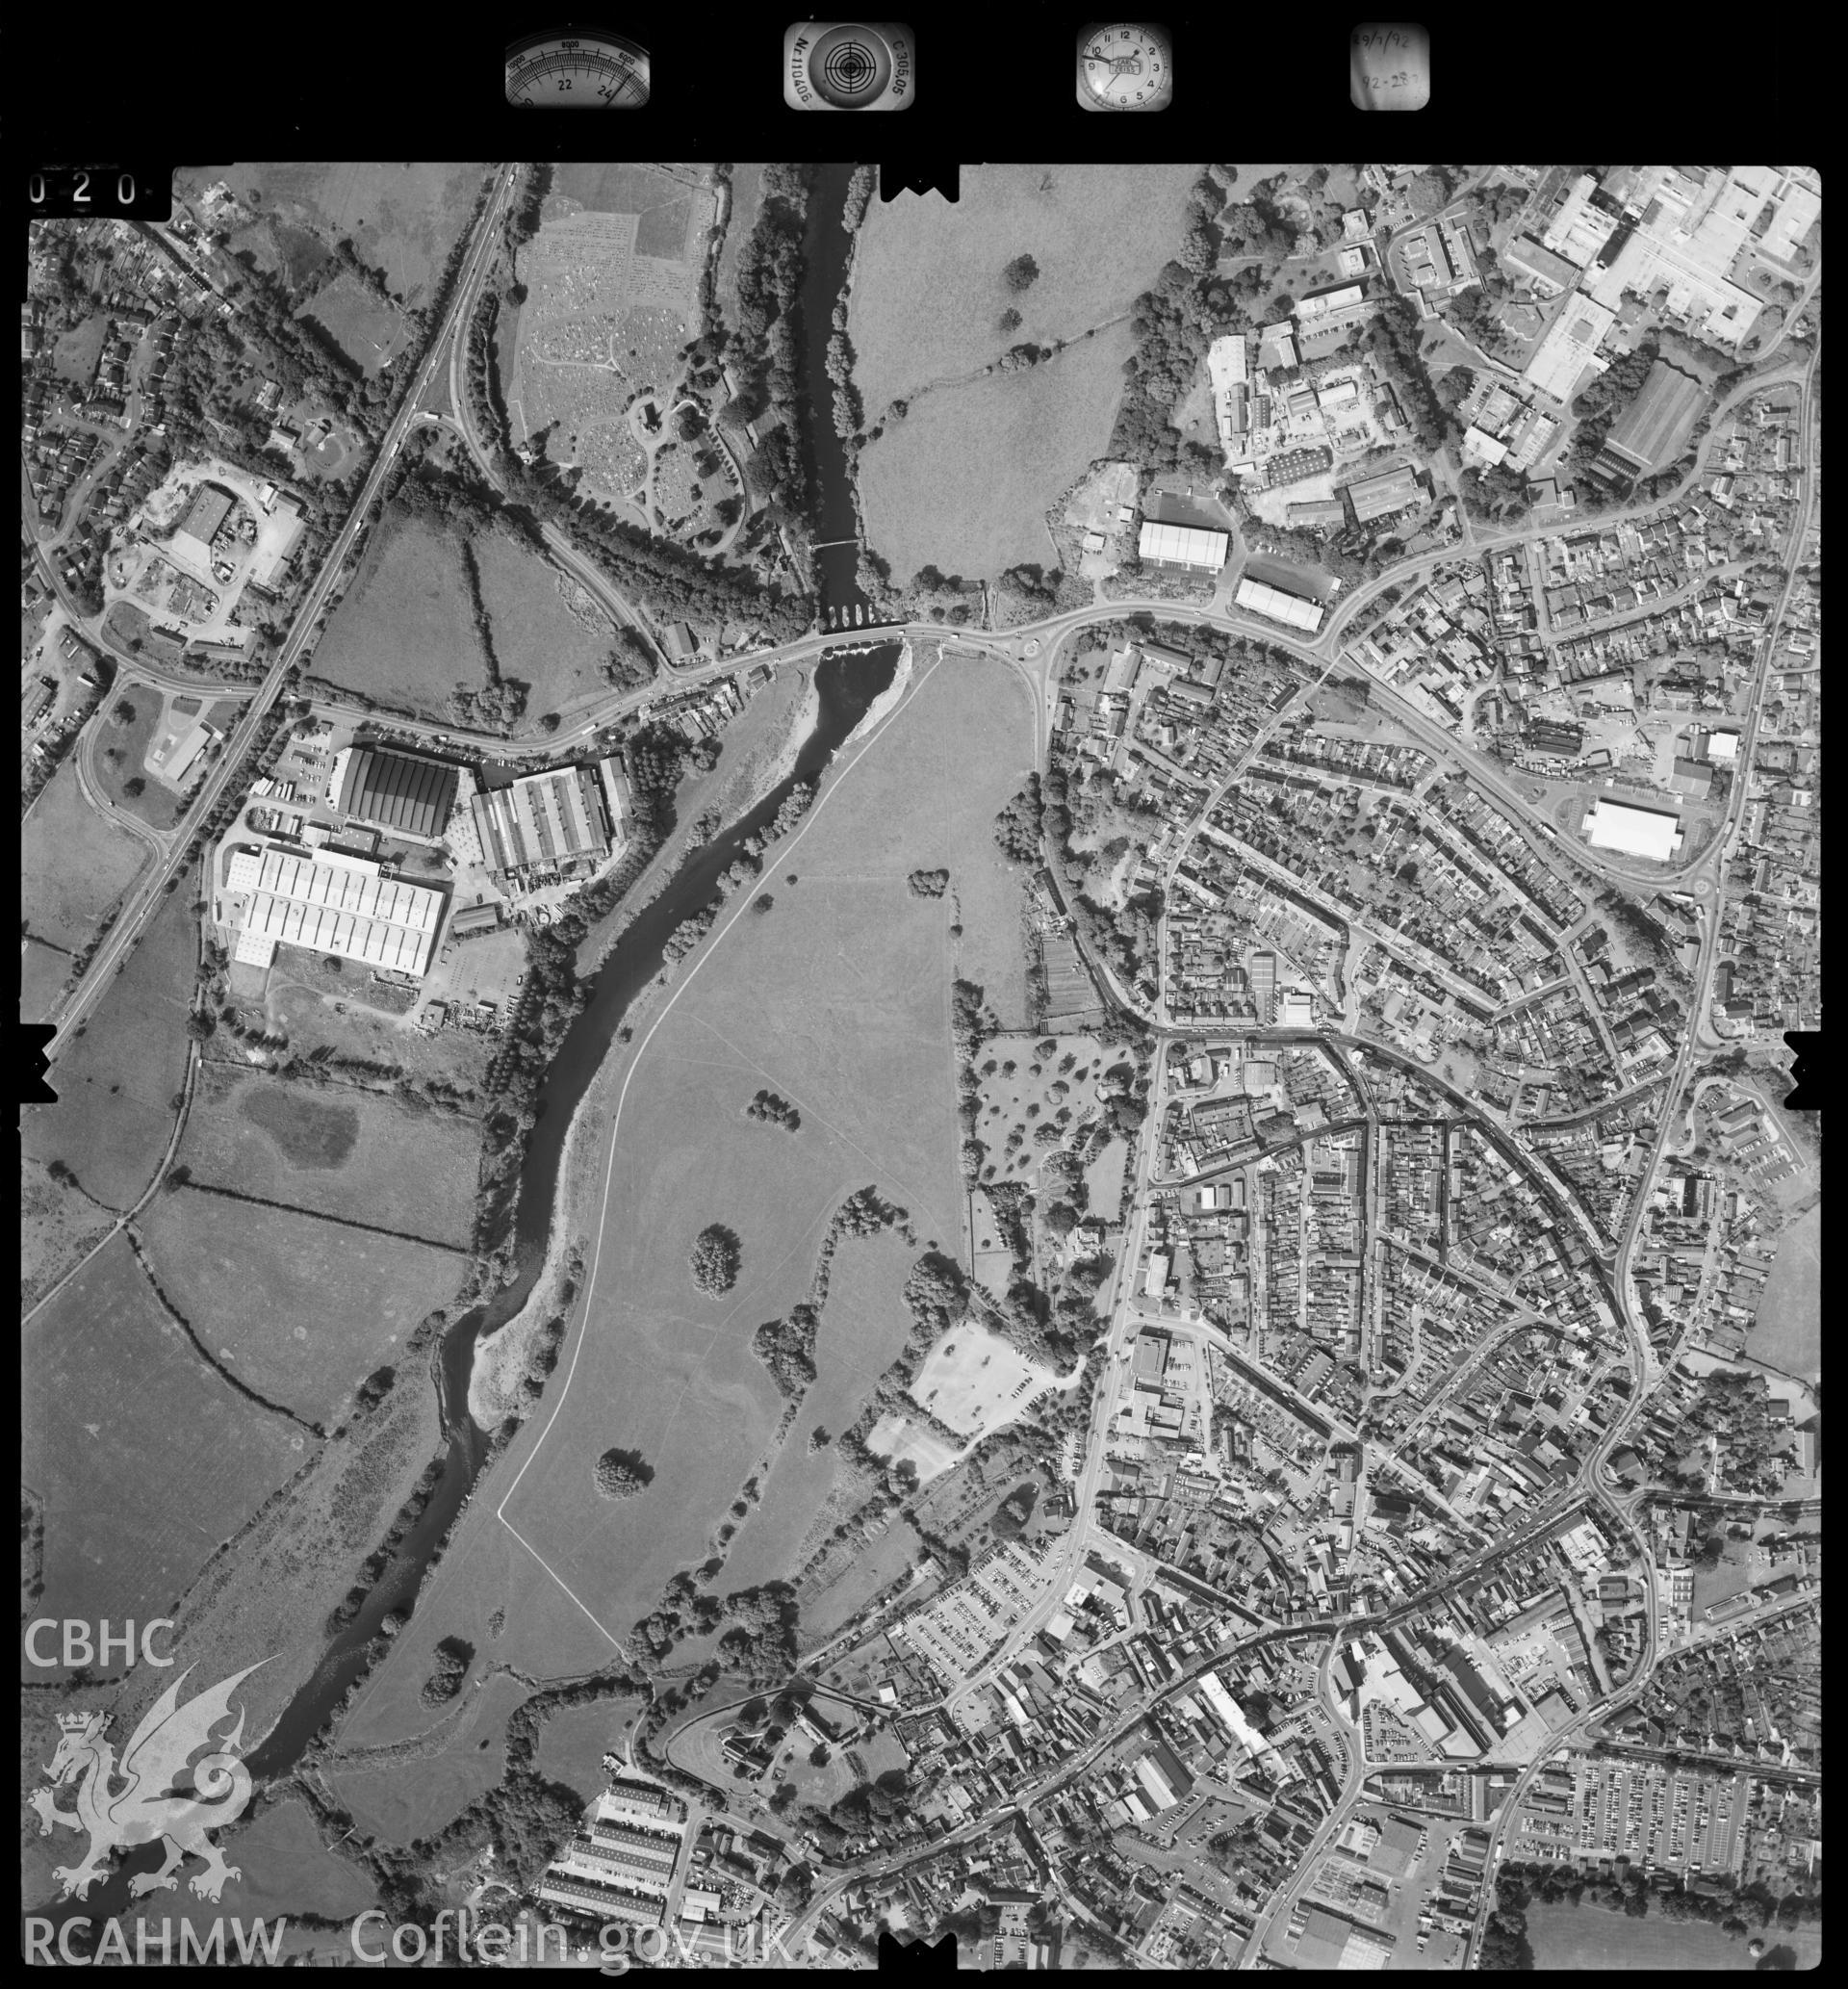 Digitized copy of an aerial photograph showing the Abergavenny area, taken by Ordnance Survey, 1992.